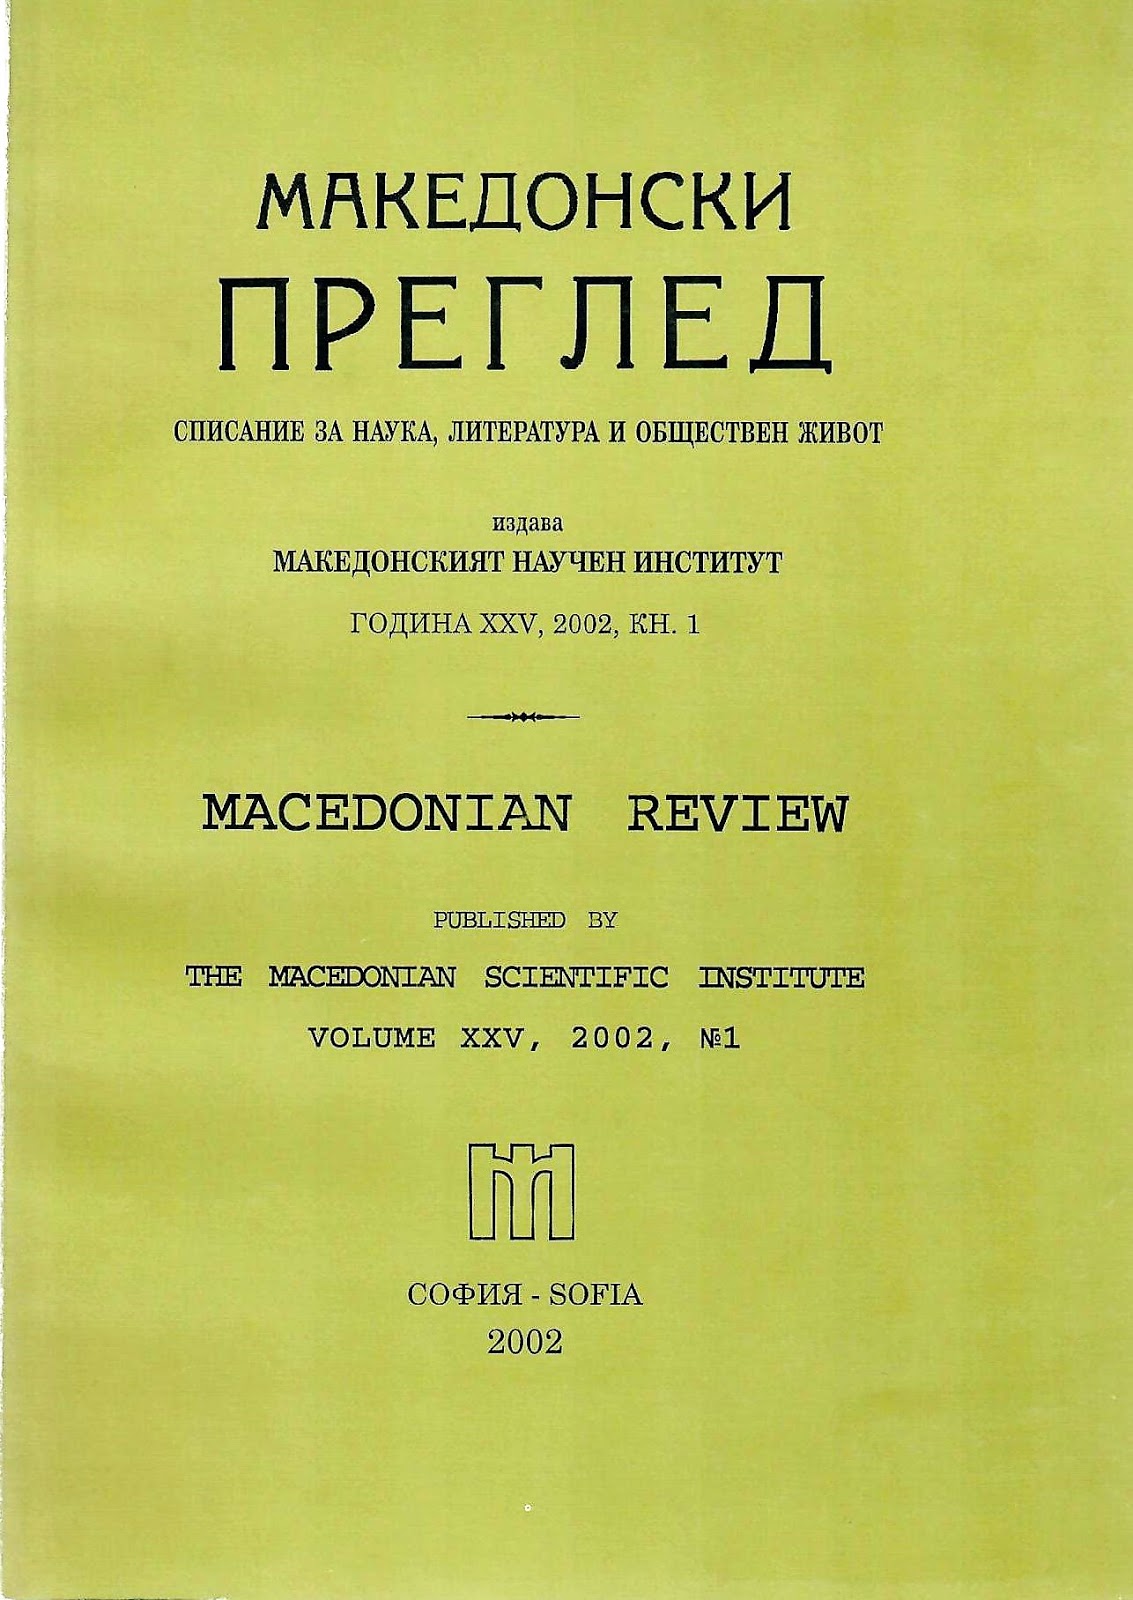 The Macedonian Literary Circle in Sofia (1938 — 1941)
Part 1: The Political Errand Cover Image